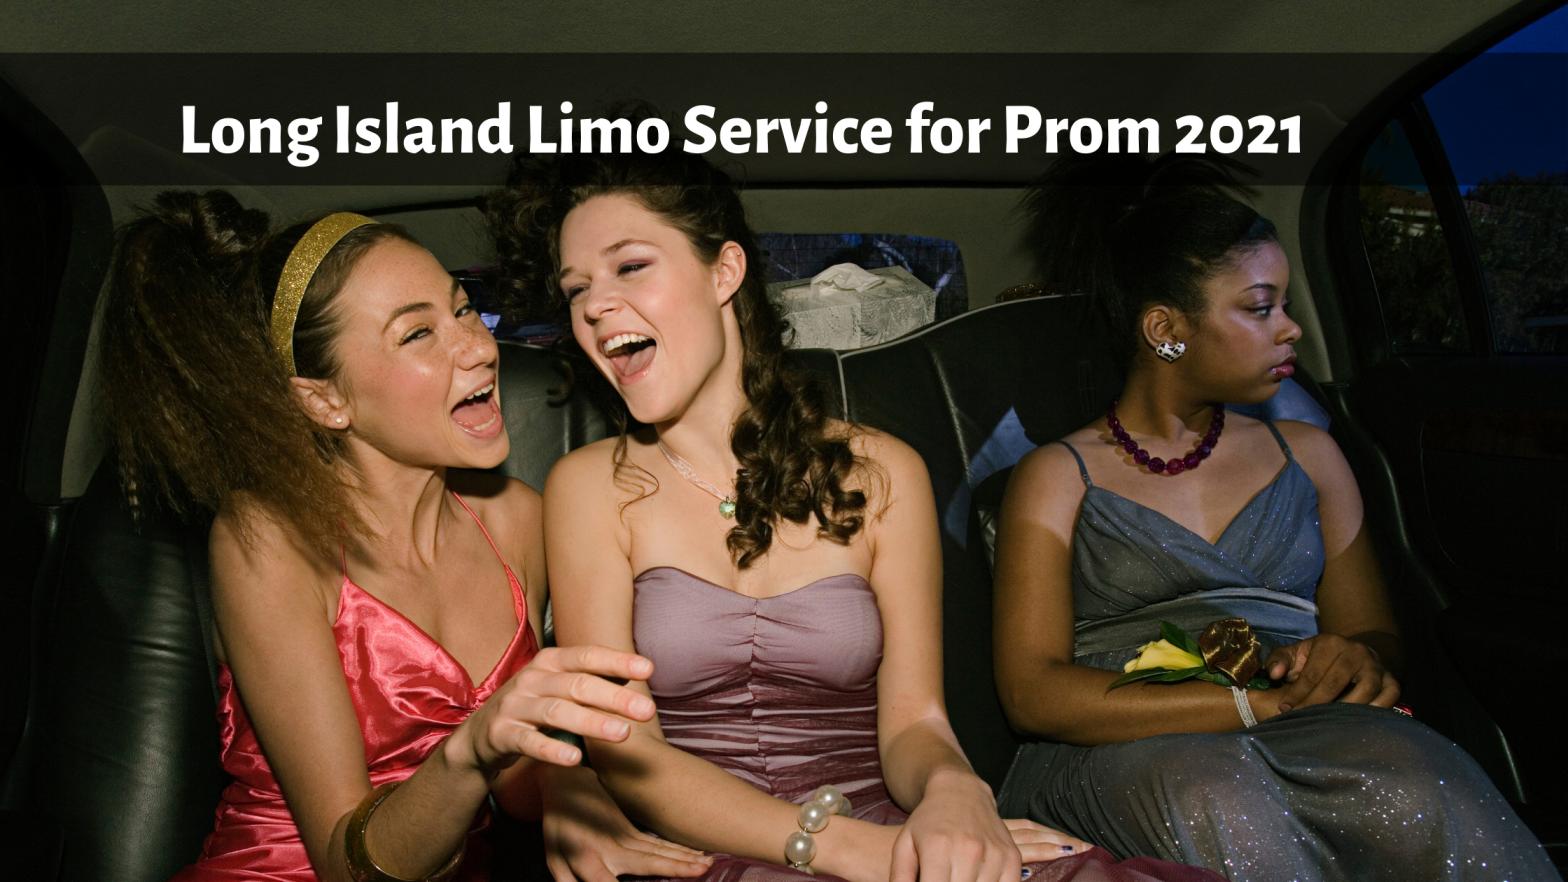 Long Island Limo Service for Prom 2021